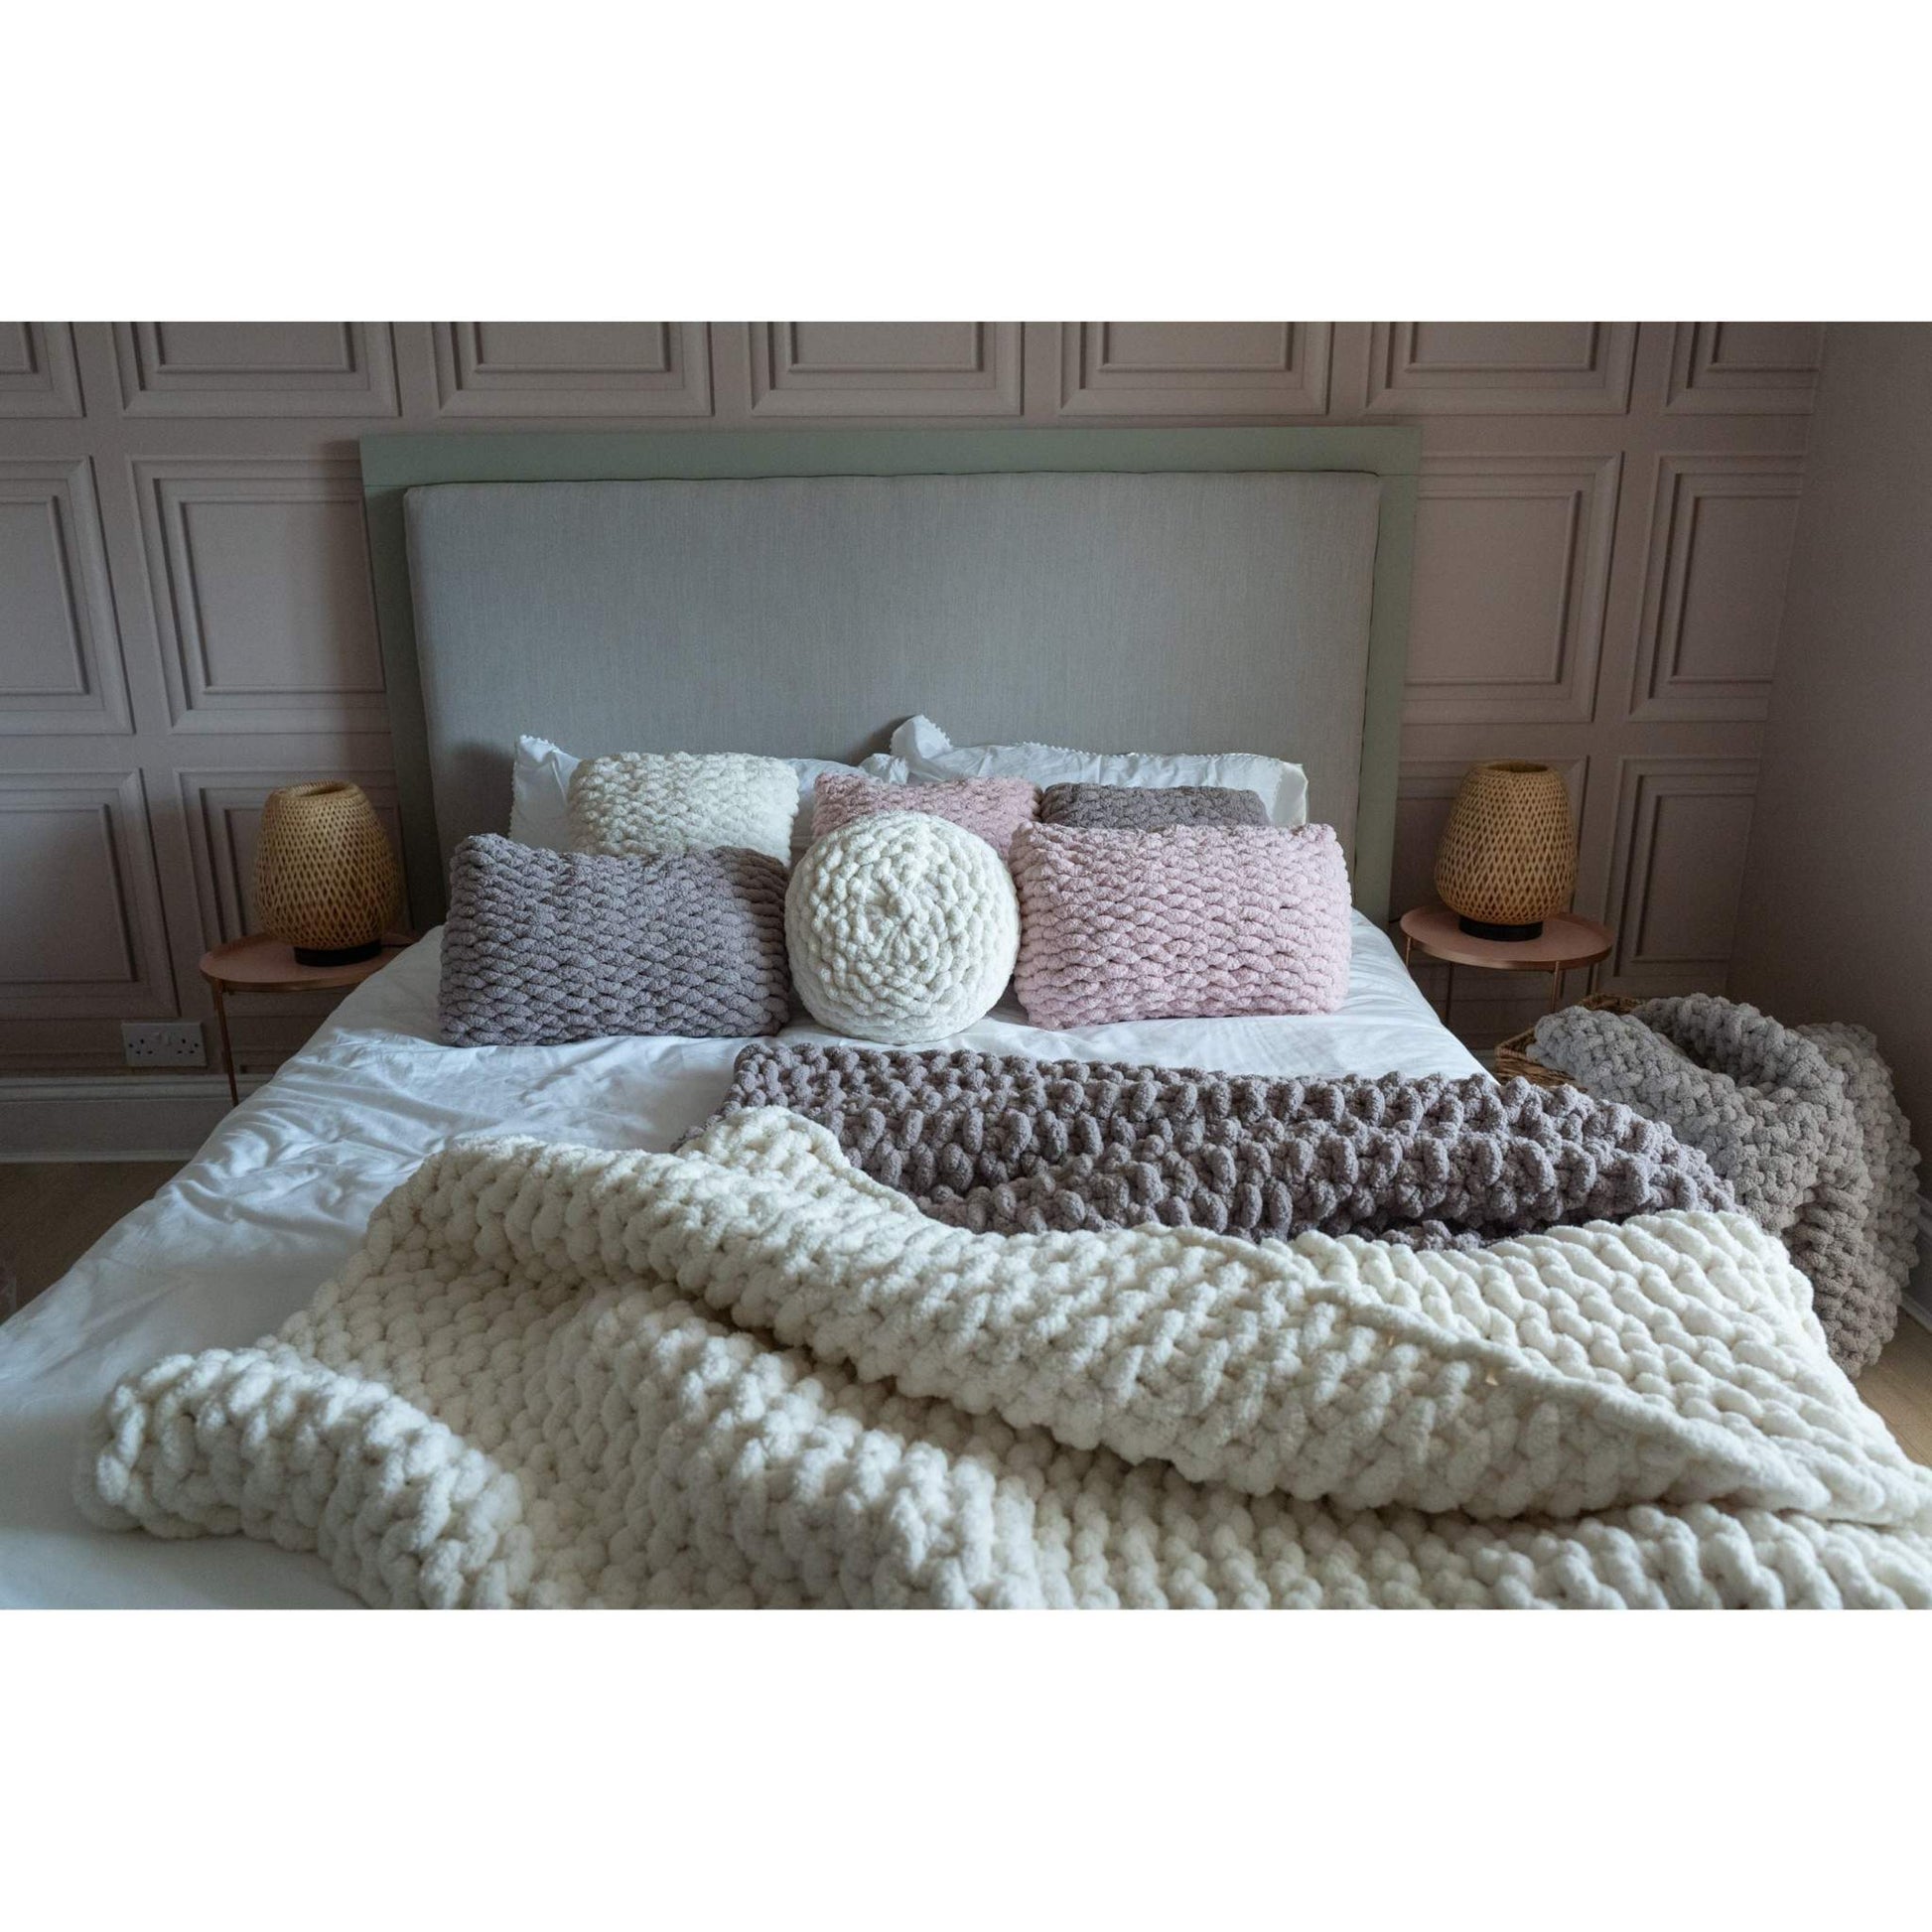 hand knit rectangular cushions and hand knit blankets on bed